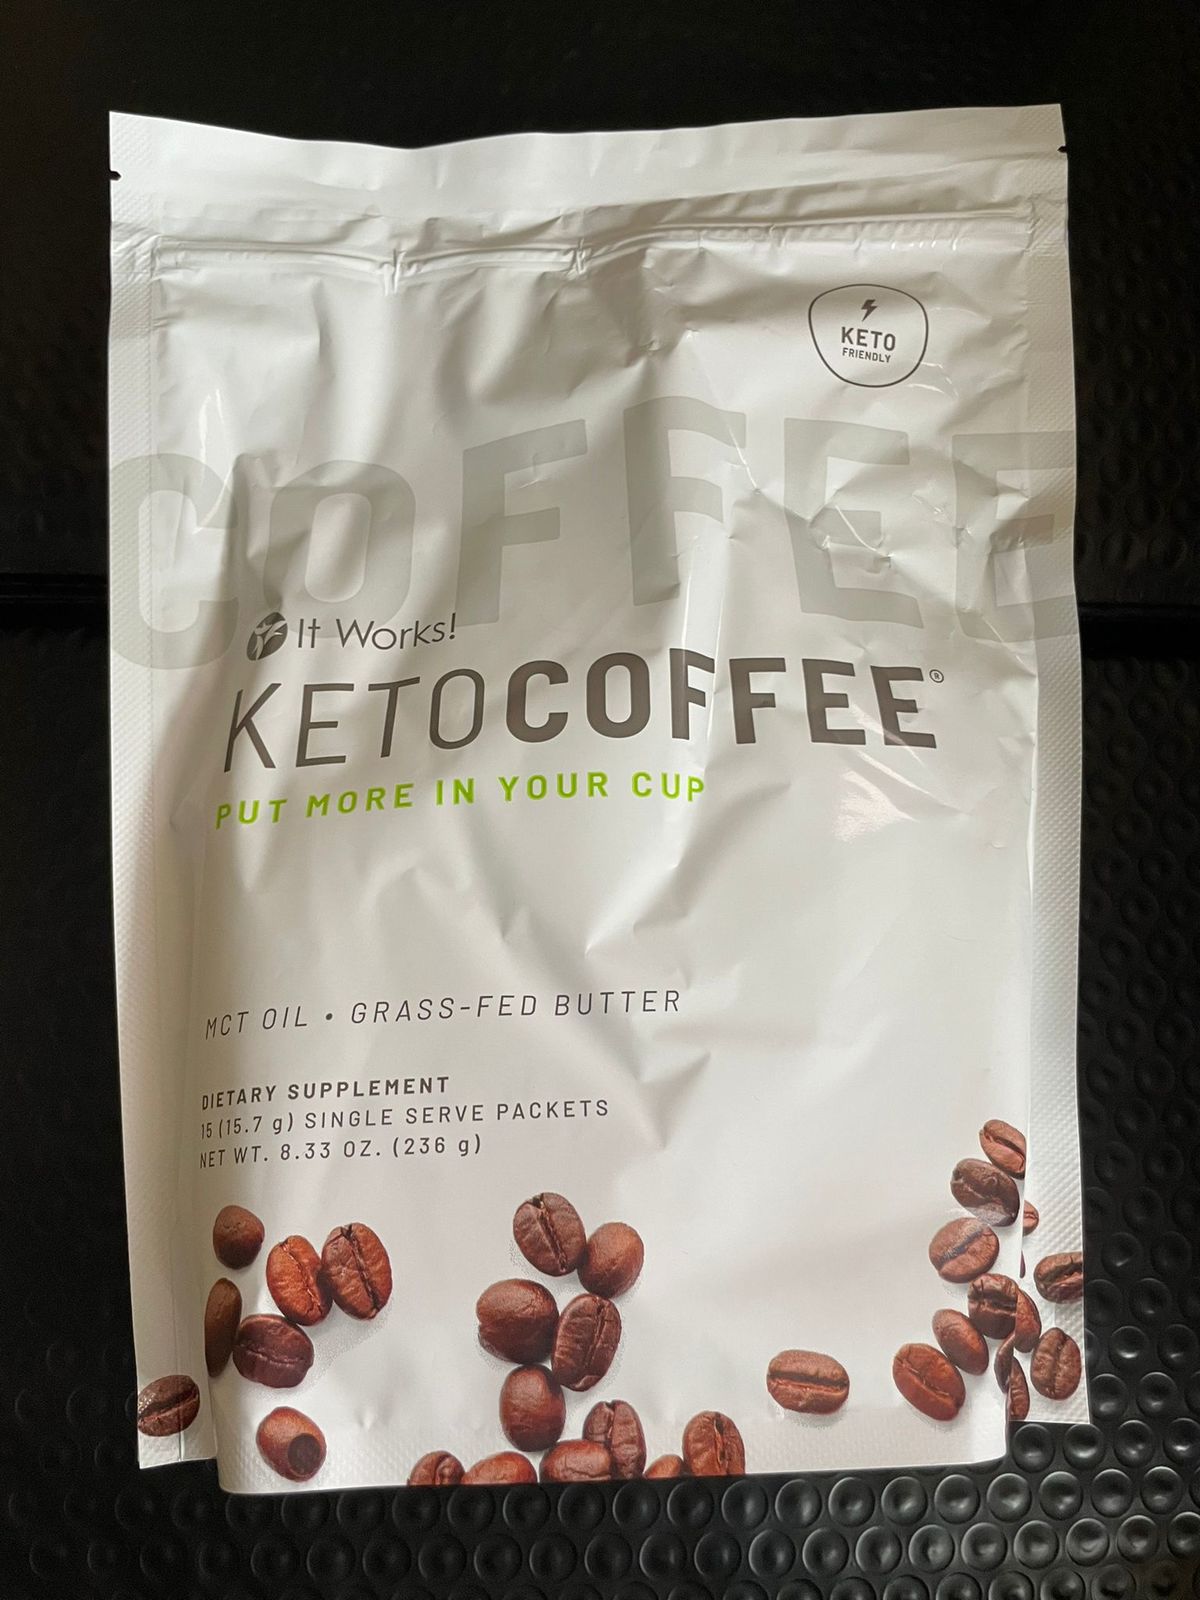 It Works! Keto Coffee 15 Packets Bag Ships - Free Shipping! - $46.99